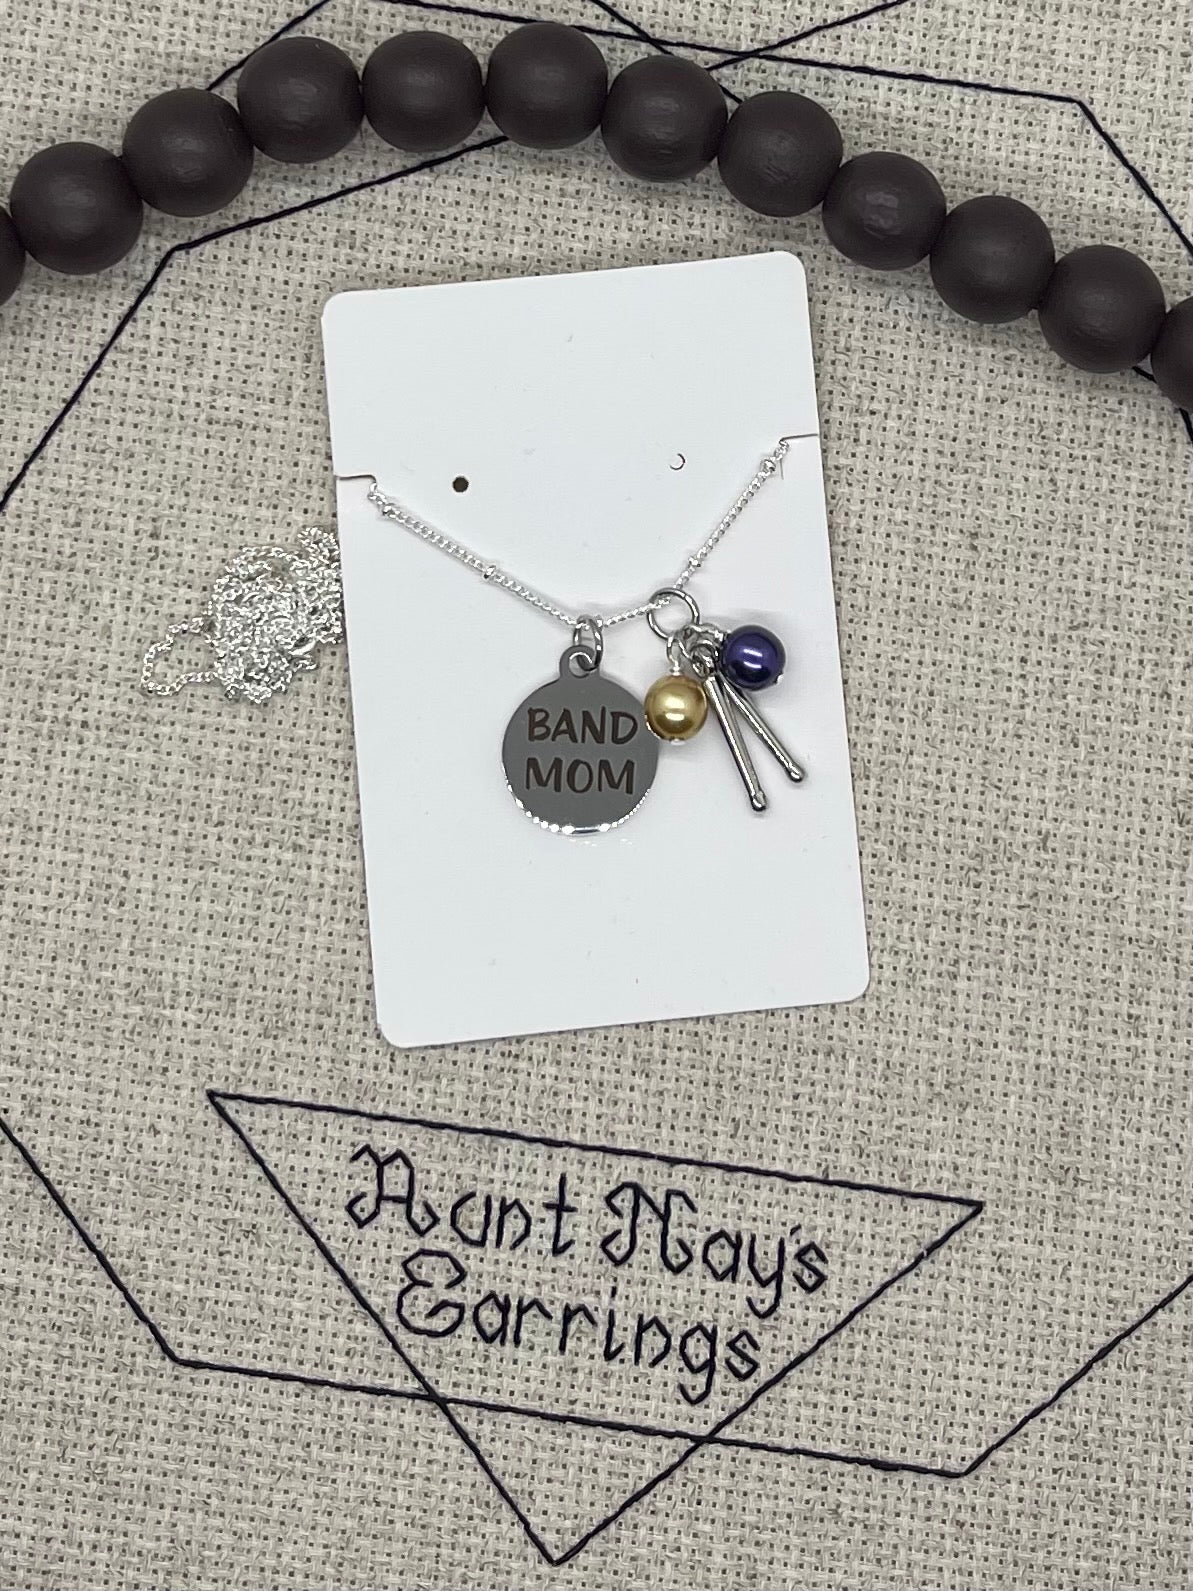 "BAND MOM" Silver Charm Necklace